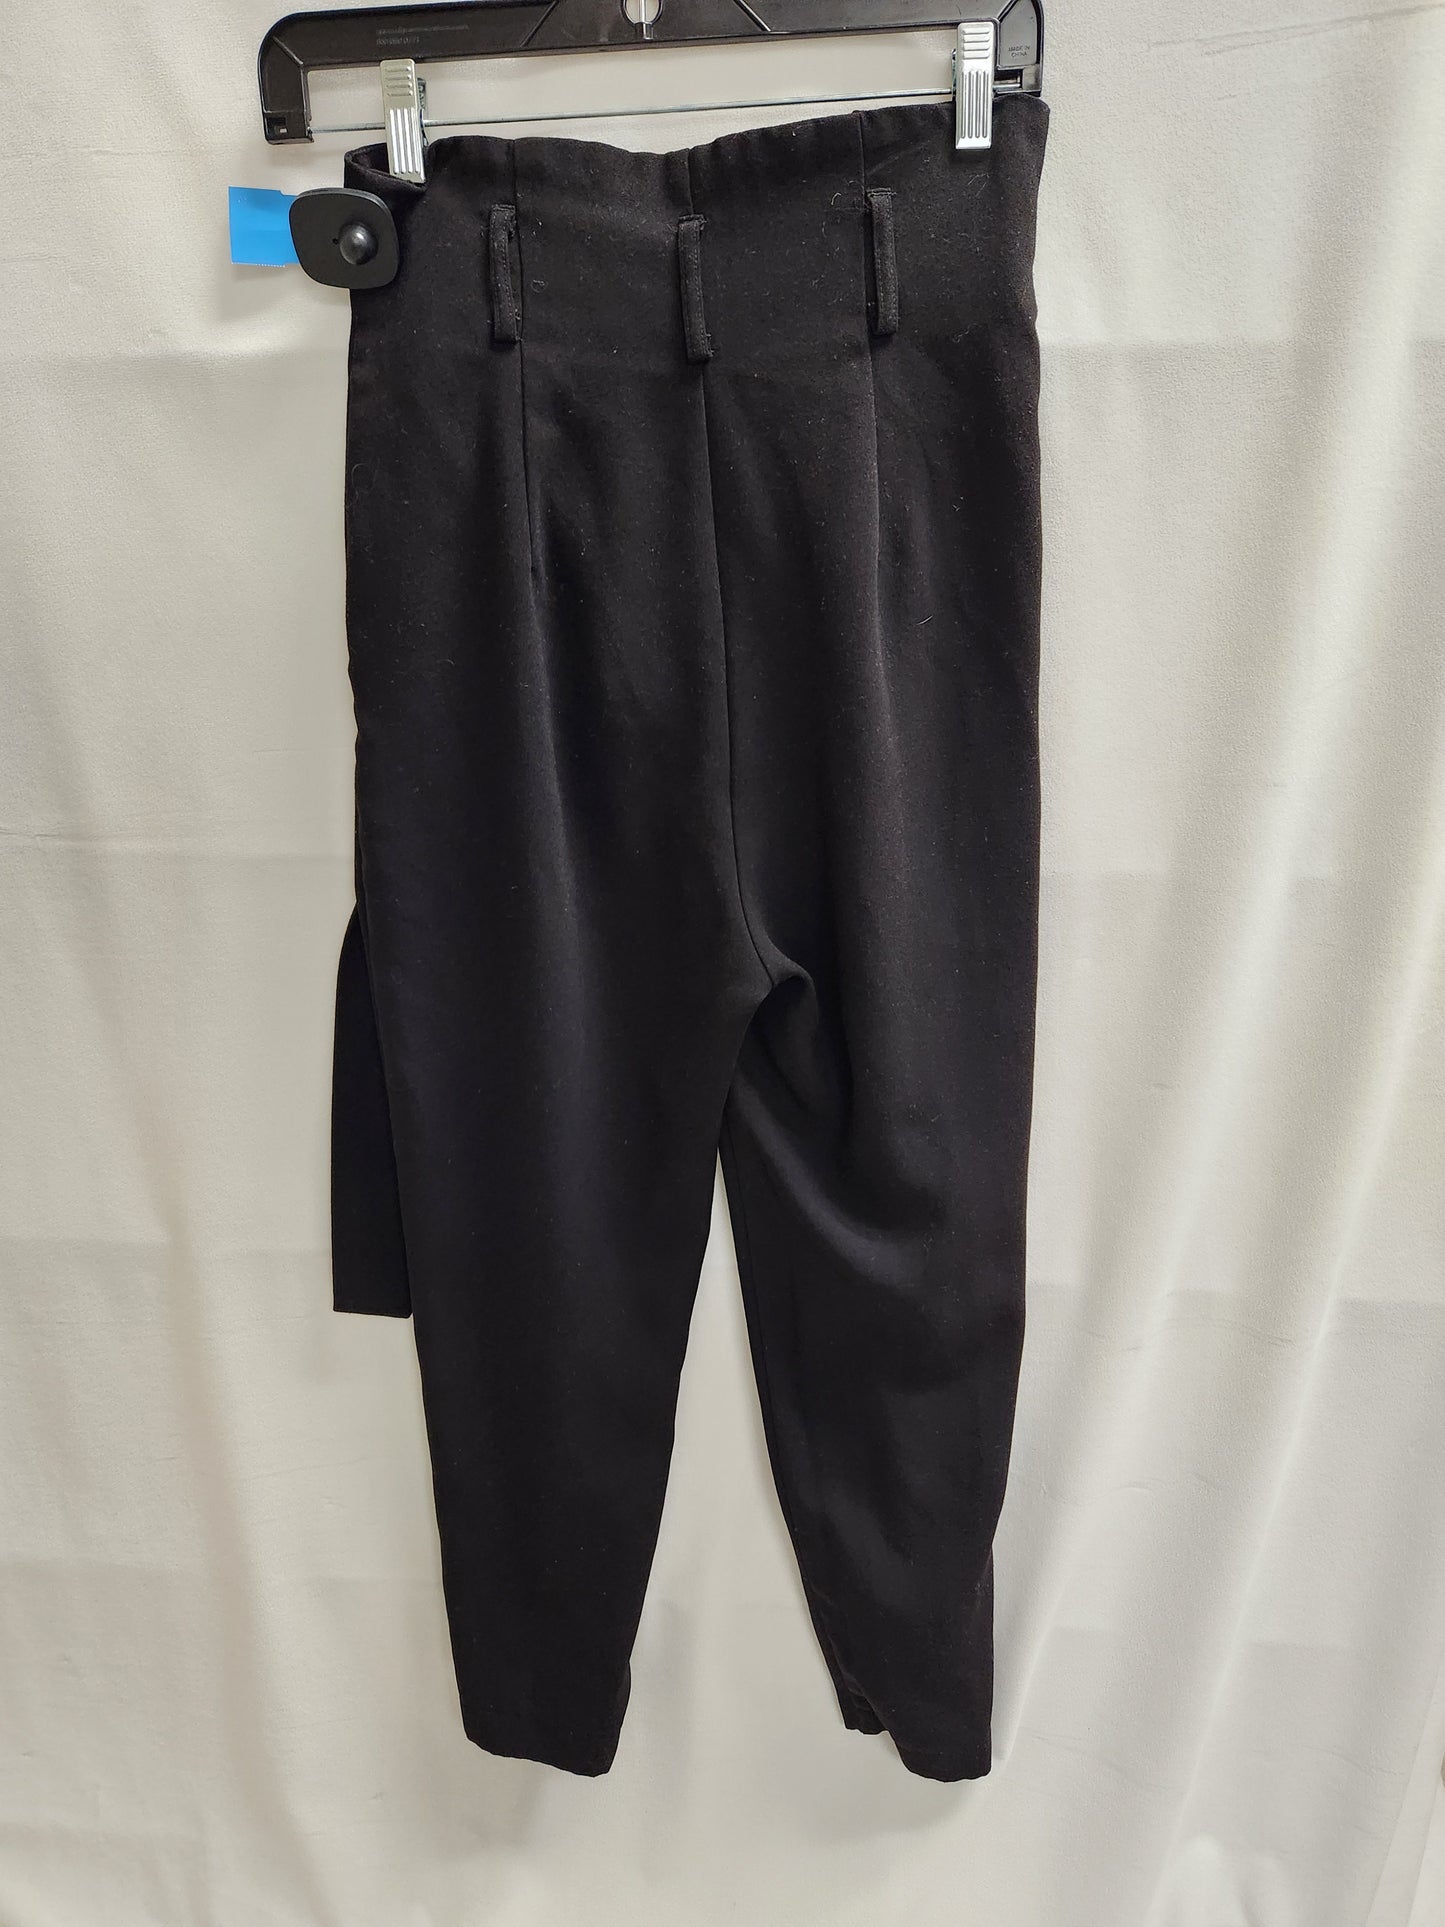 Pants Ankle By Clothes Mentor  Size: 2